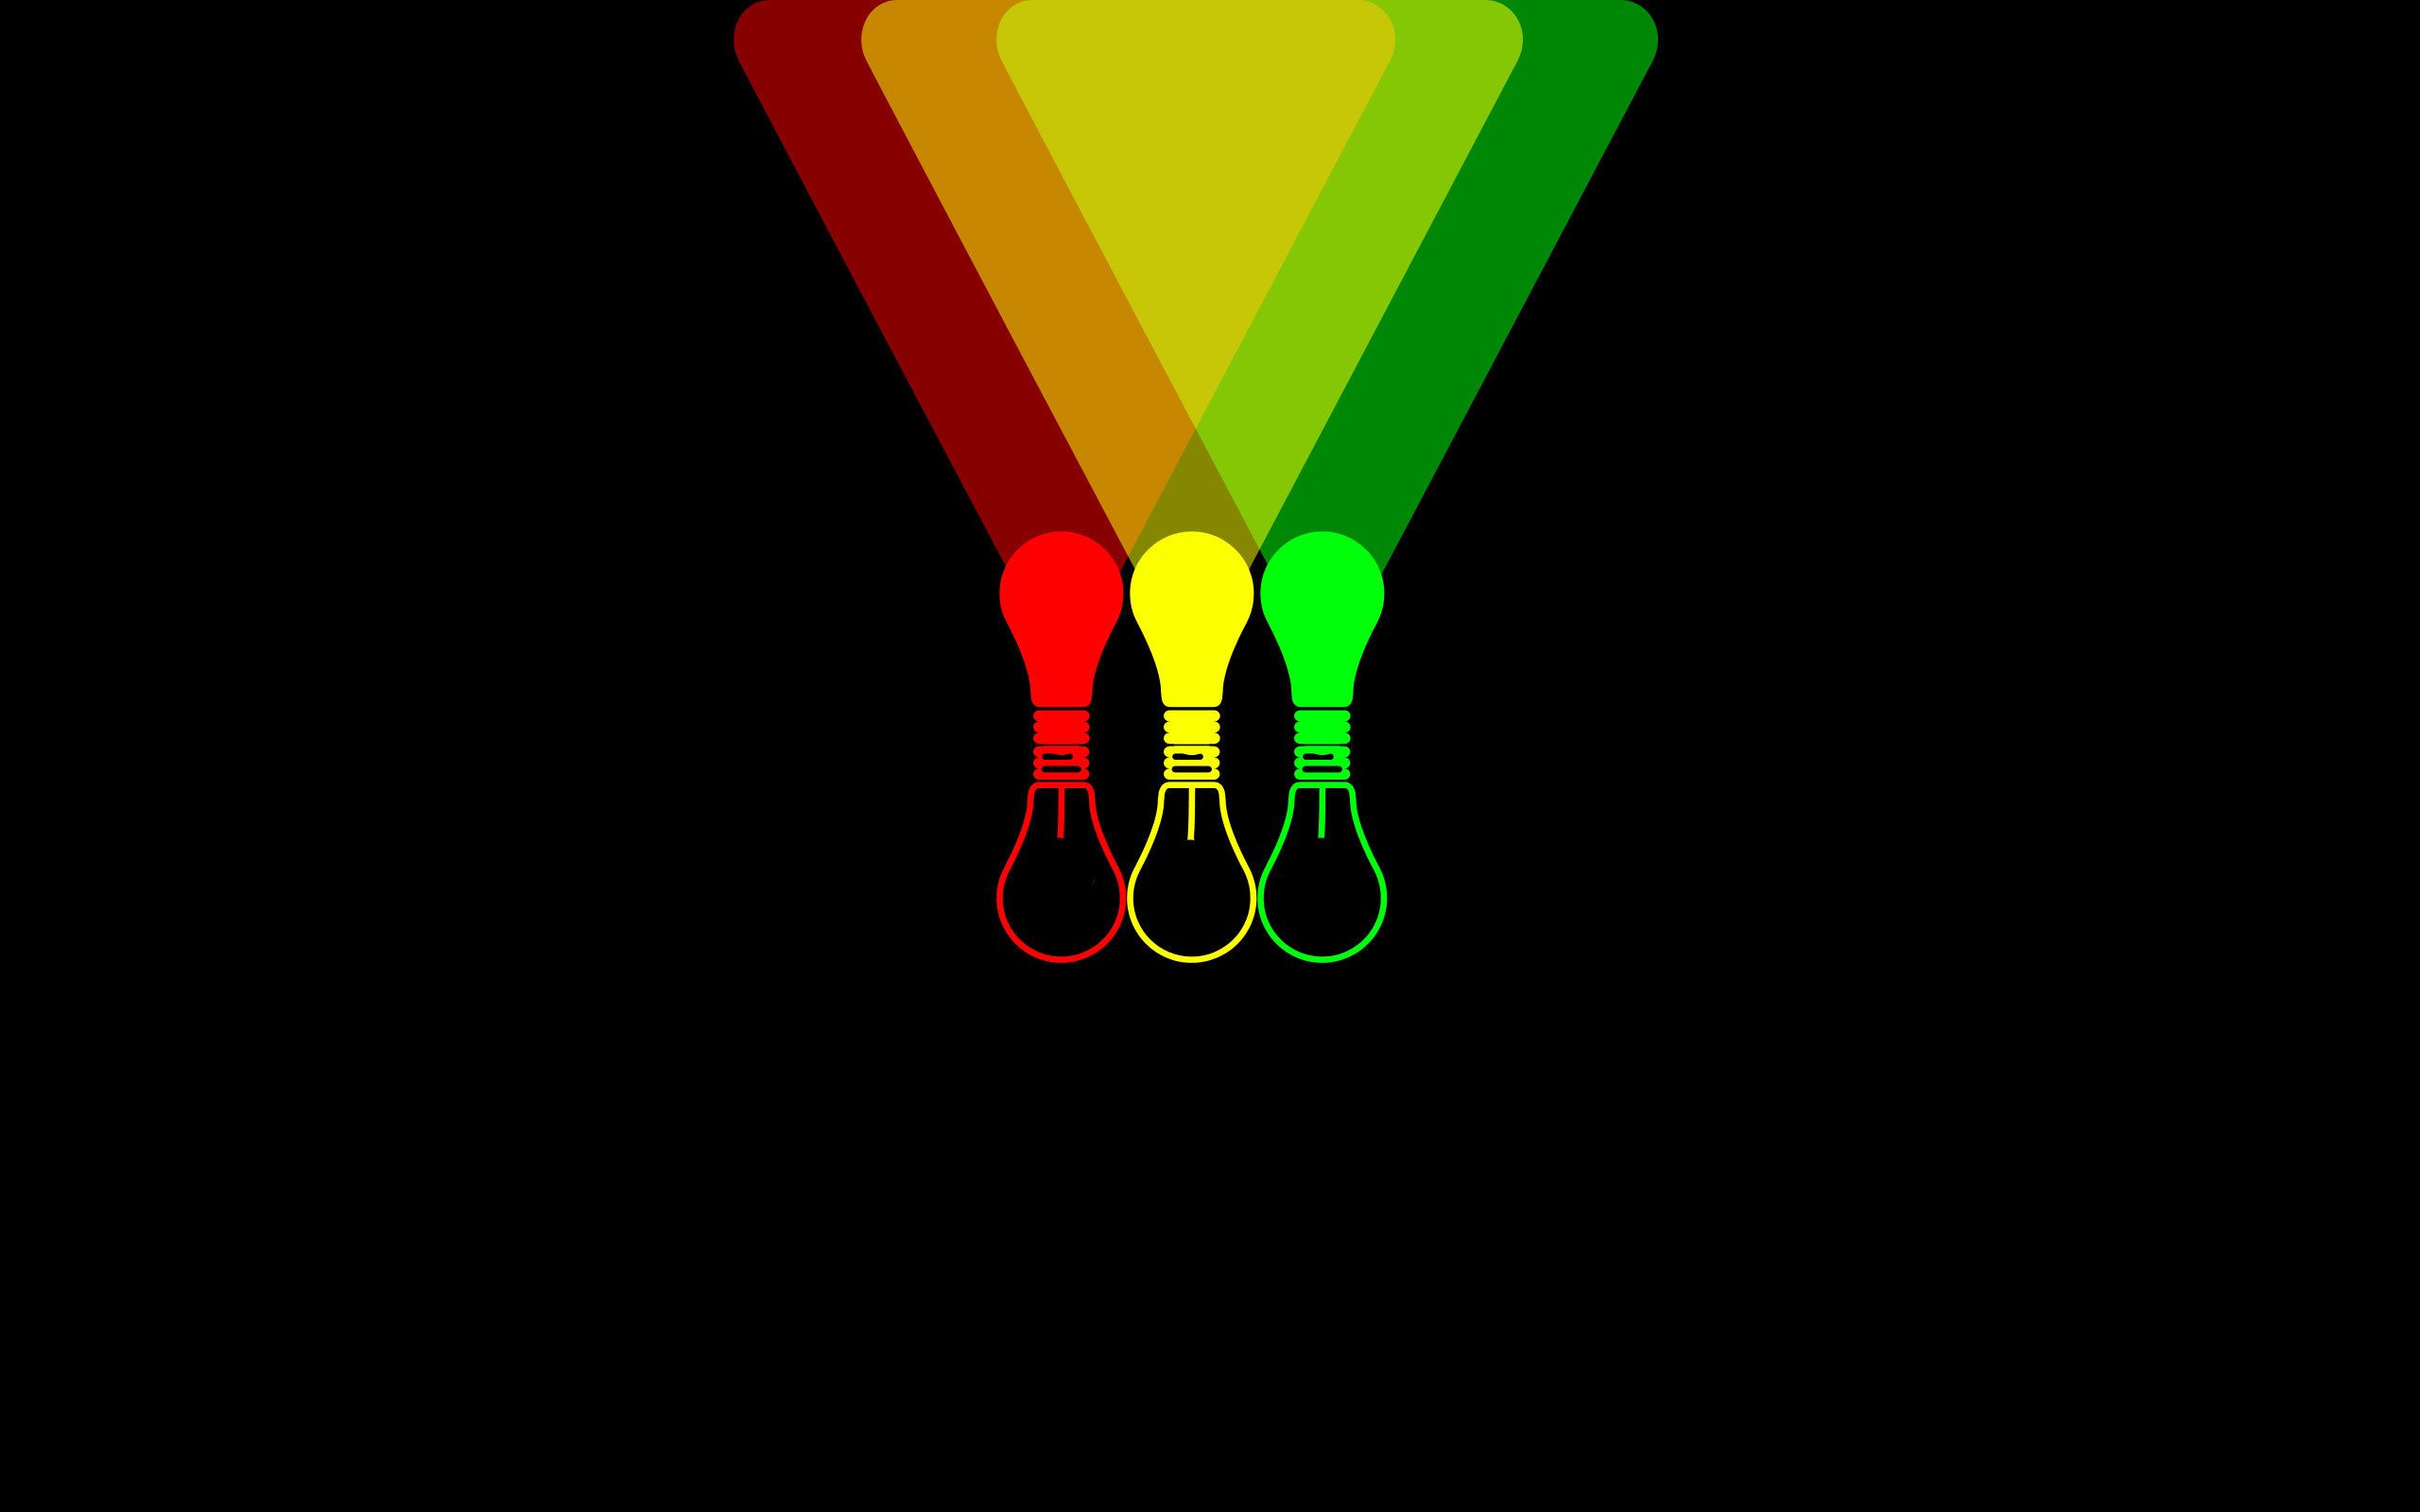 Download wallpaper light bulb, color, light, background, Wallpaper, black, minimalism, red, green, light bulb, yellow, Shine, section minimalism in resolution 2560x1600